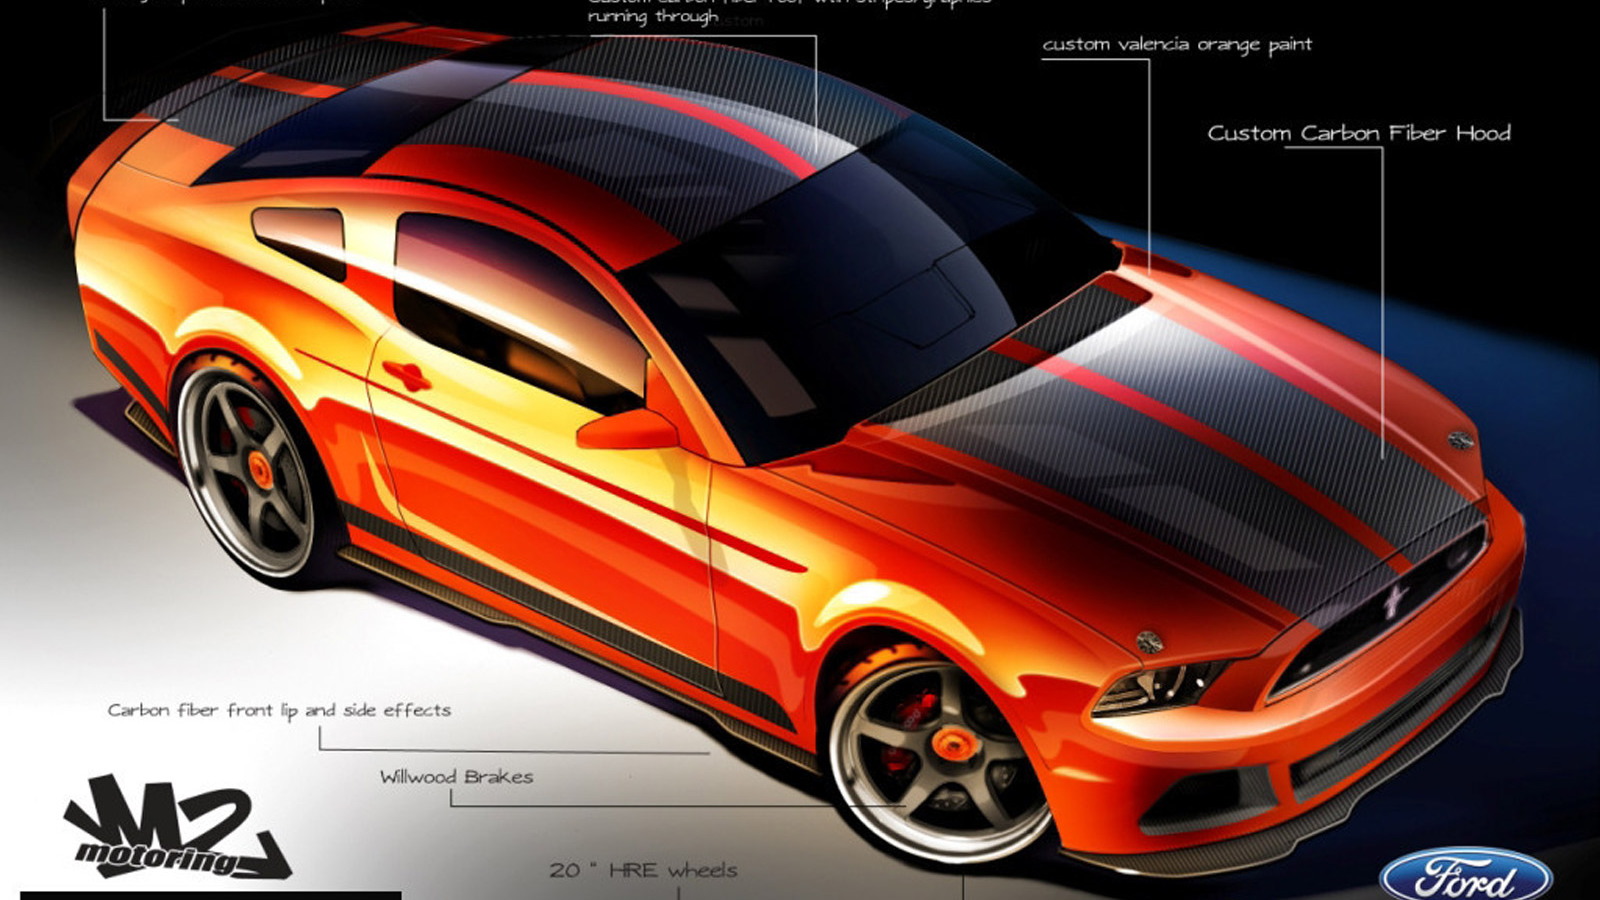 2013 Ford Mustang - Built by M2-Motoring